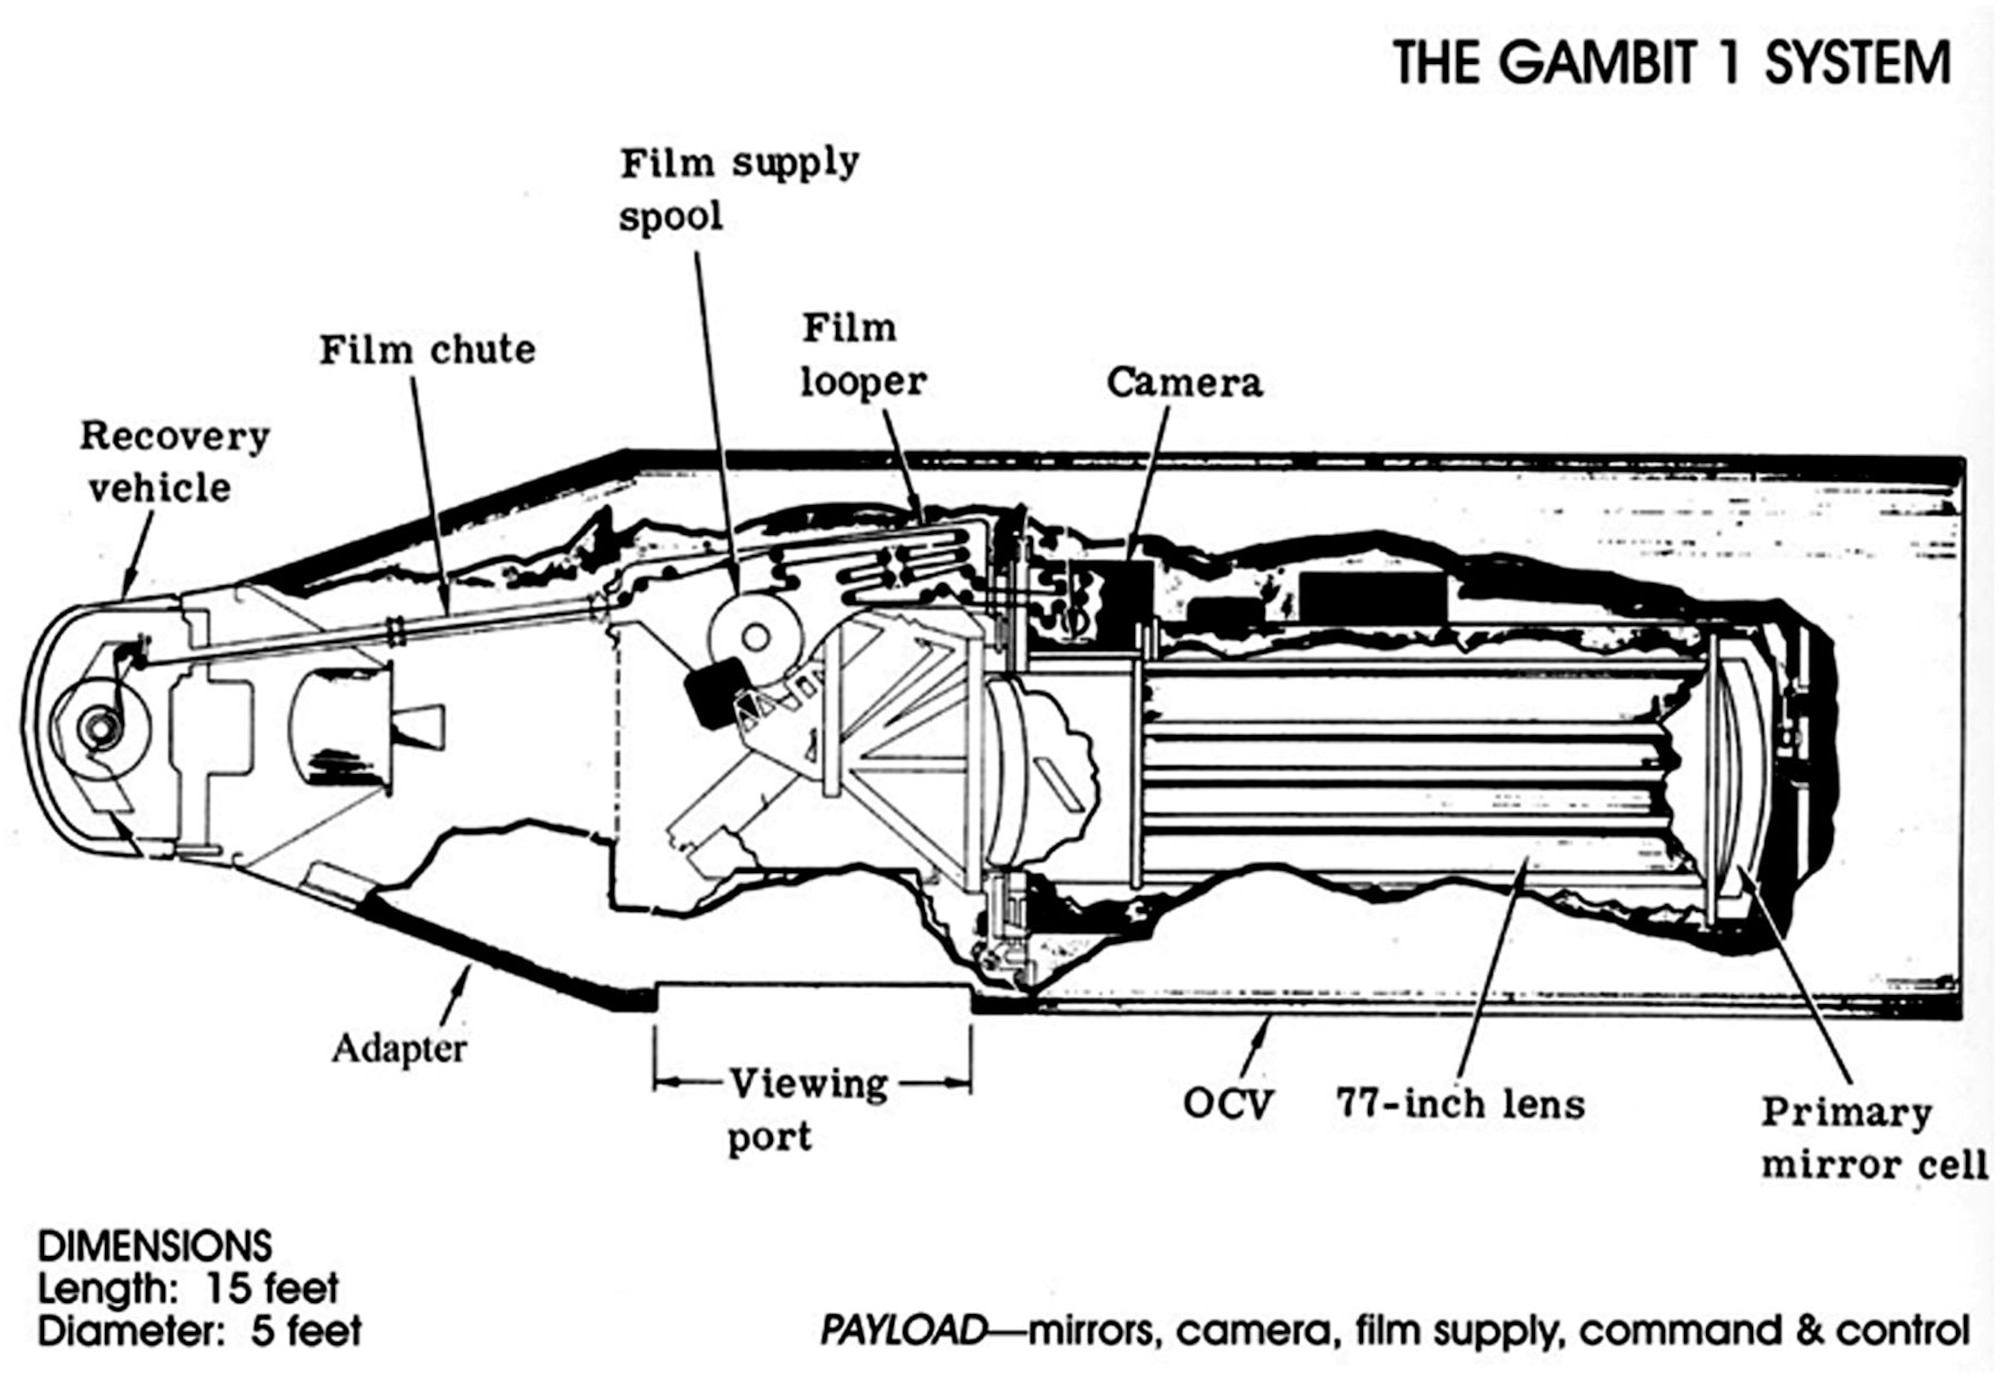 GAMBIT 1 KH-7 schematic showing the arrangement of the camera, film supply and re-entry vehicle. (Photo courtesy of National Reconnaissance Office)